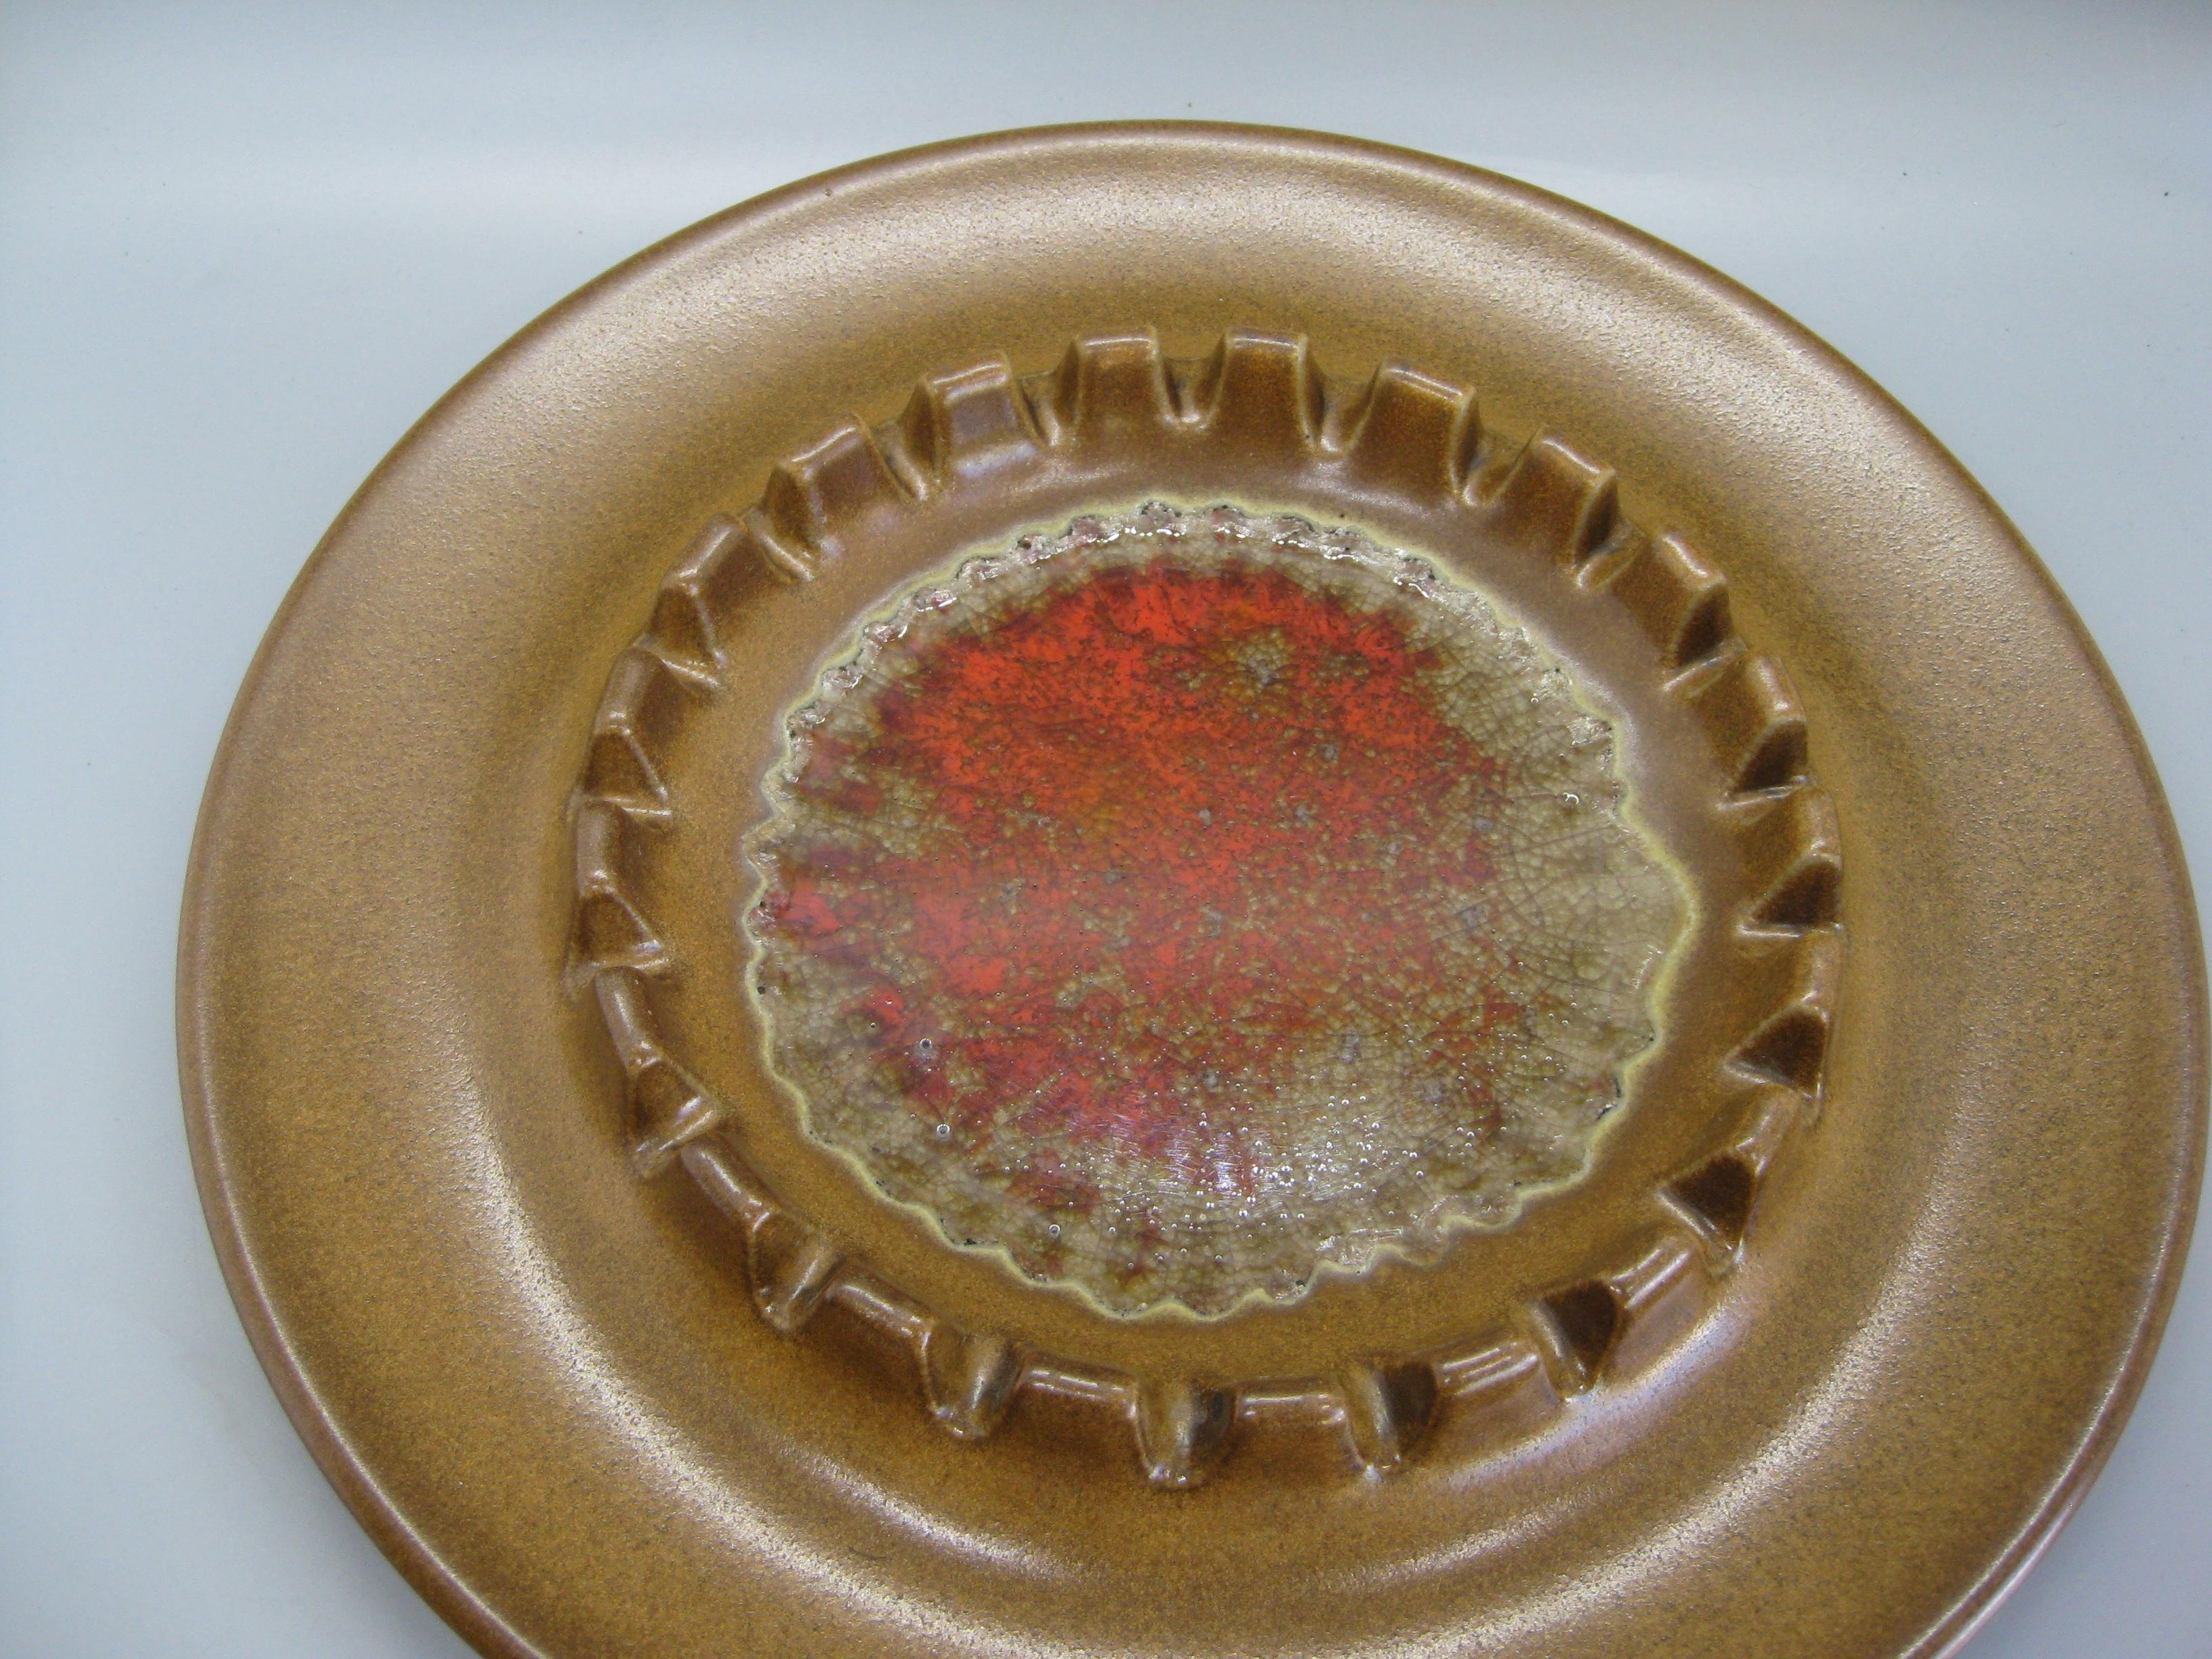 Great California studio pottery ashtray by Robert Maxwell, circa 1965. The ashtray has red crackle glass in the center. Signed on the bottom by the artist. Very unique design and form. In excellent condition with no chips, no cracks or repairs.